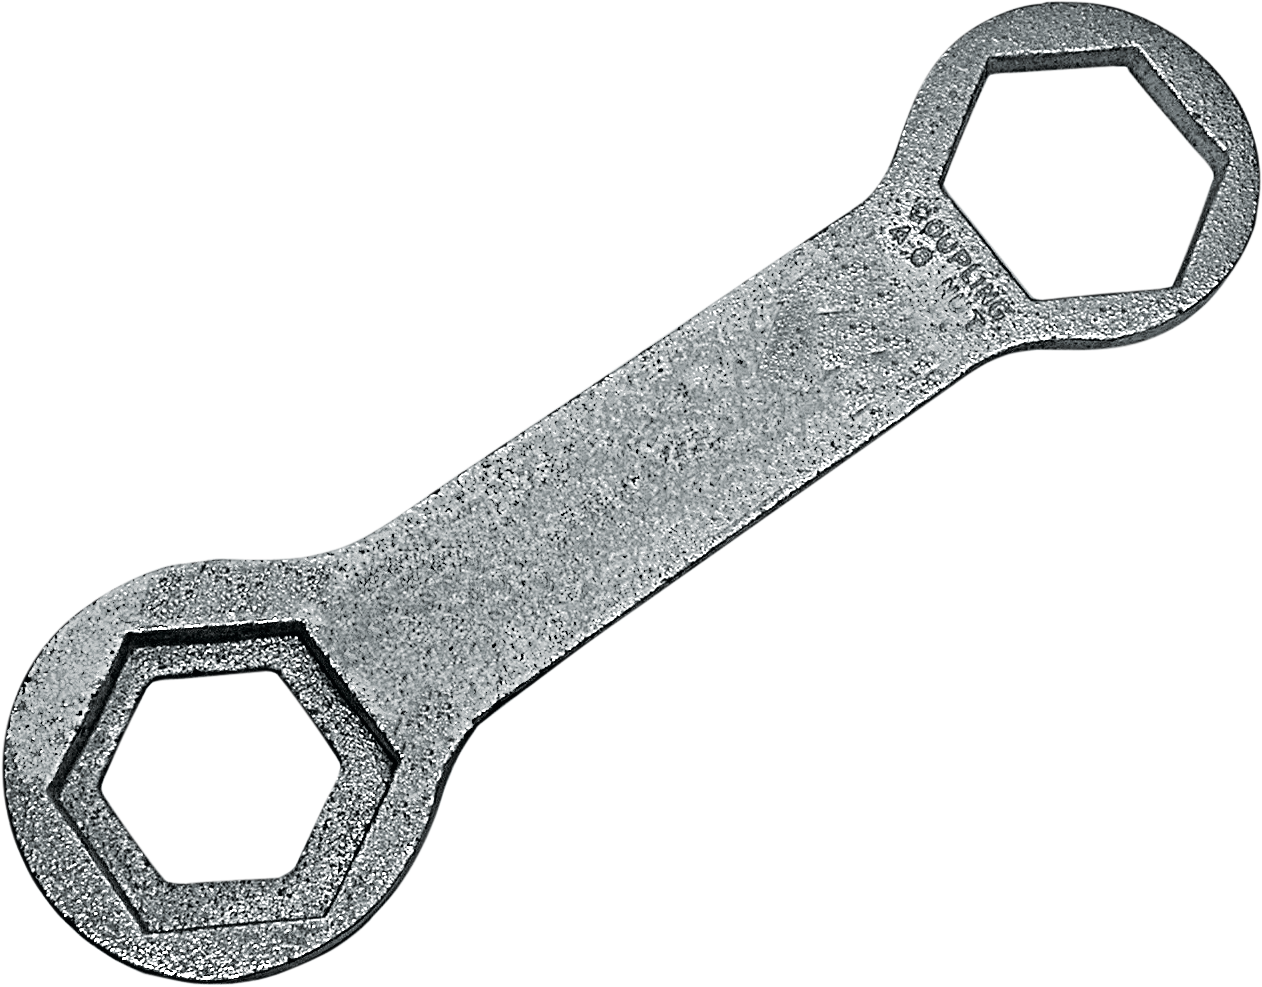 BrassCraft Drain Removal Wrench at